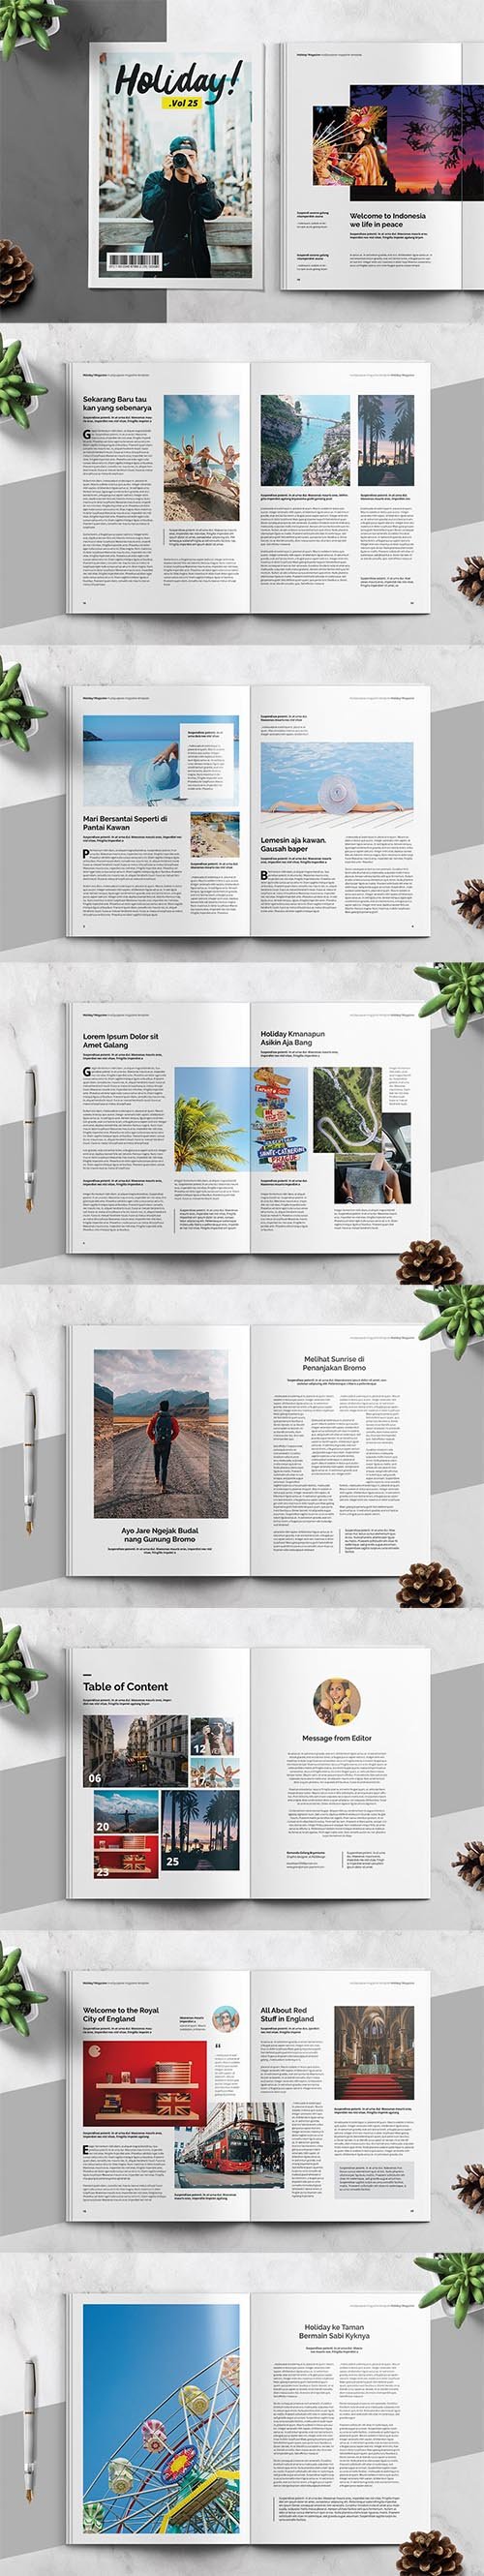 HOLIDAY - Magazine Template INDD